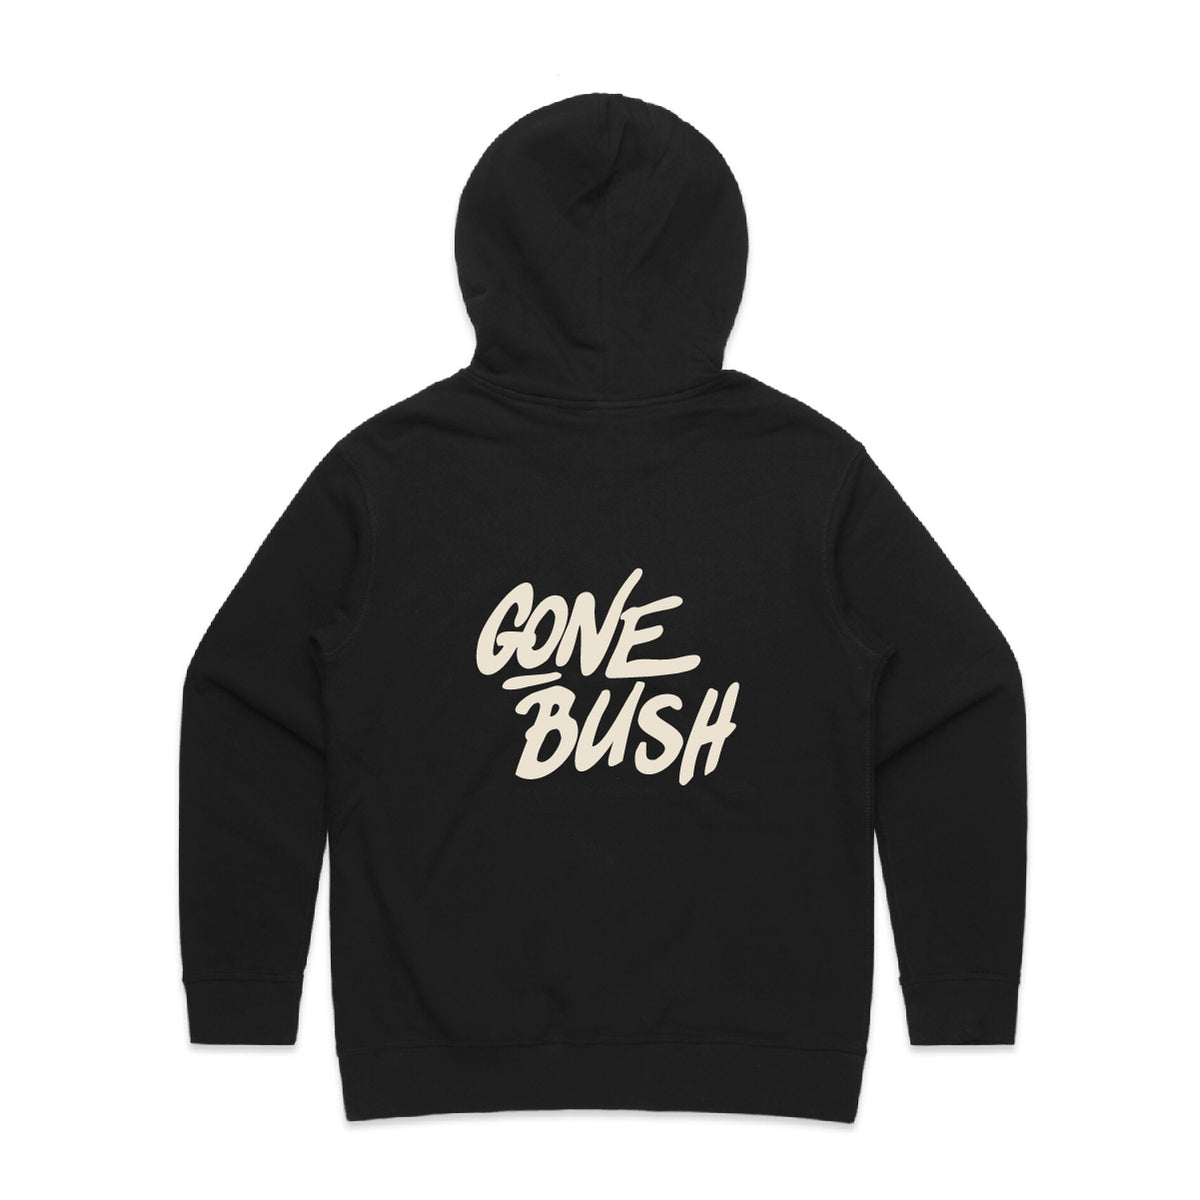 Gone Bush Puff Print Hoodie Black with Off White – Gone Bush Boot